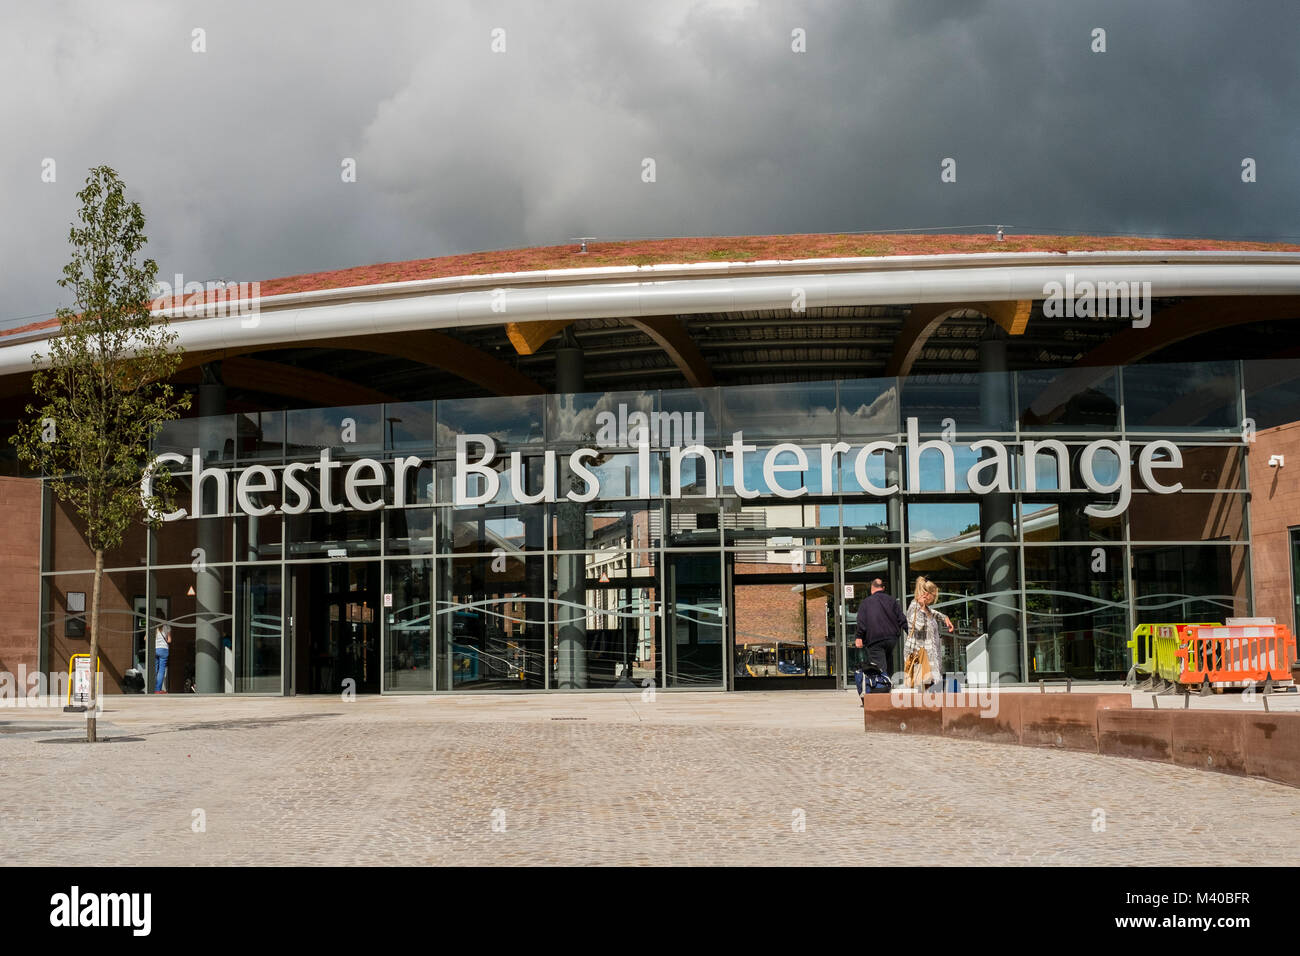 The new bus interchange station in Chester, UK which opened in 2017. Stock Photo